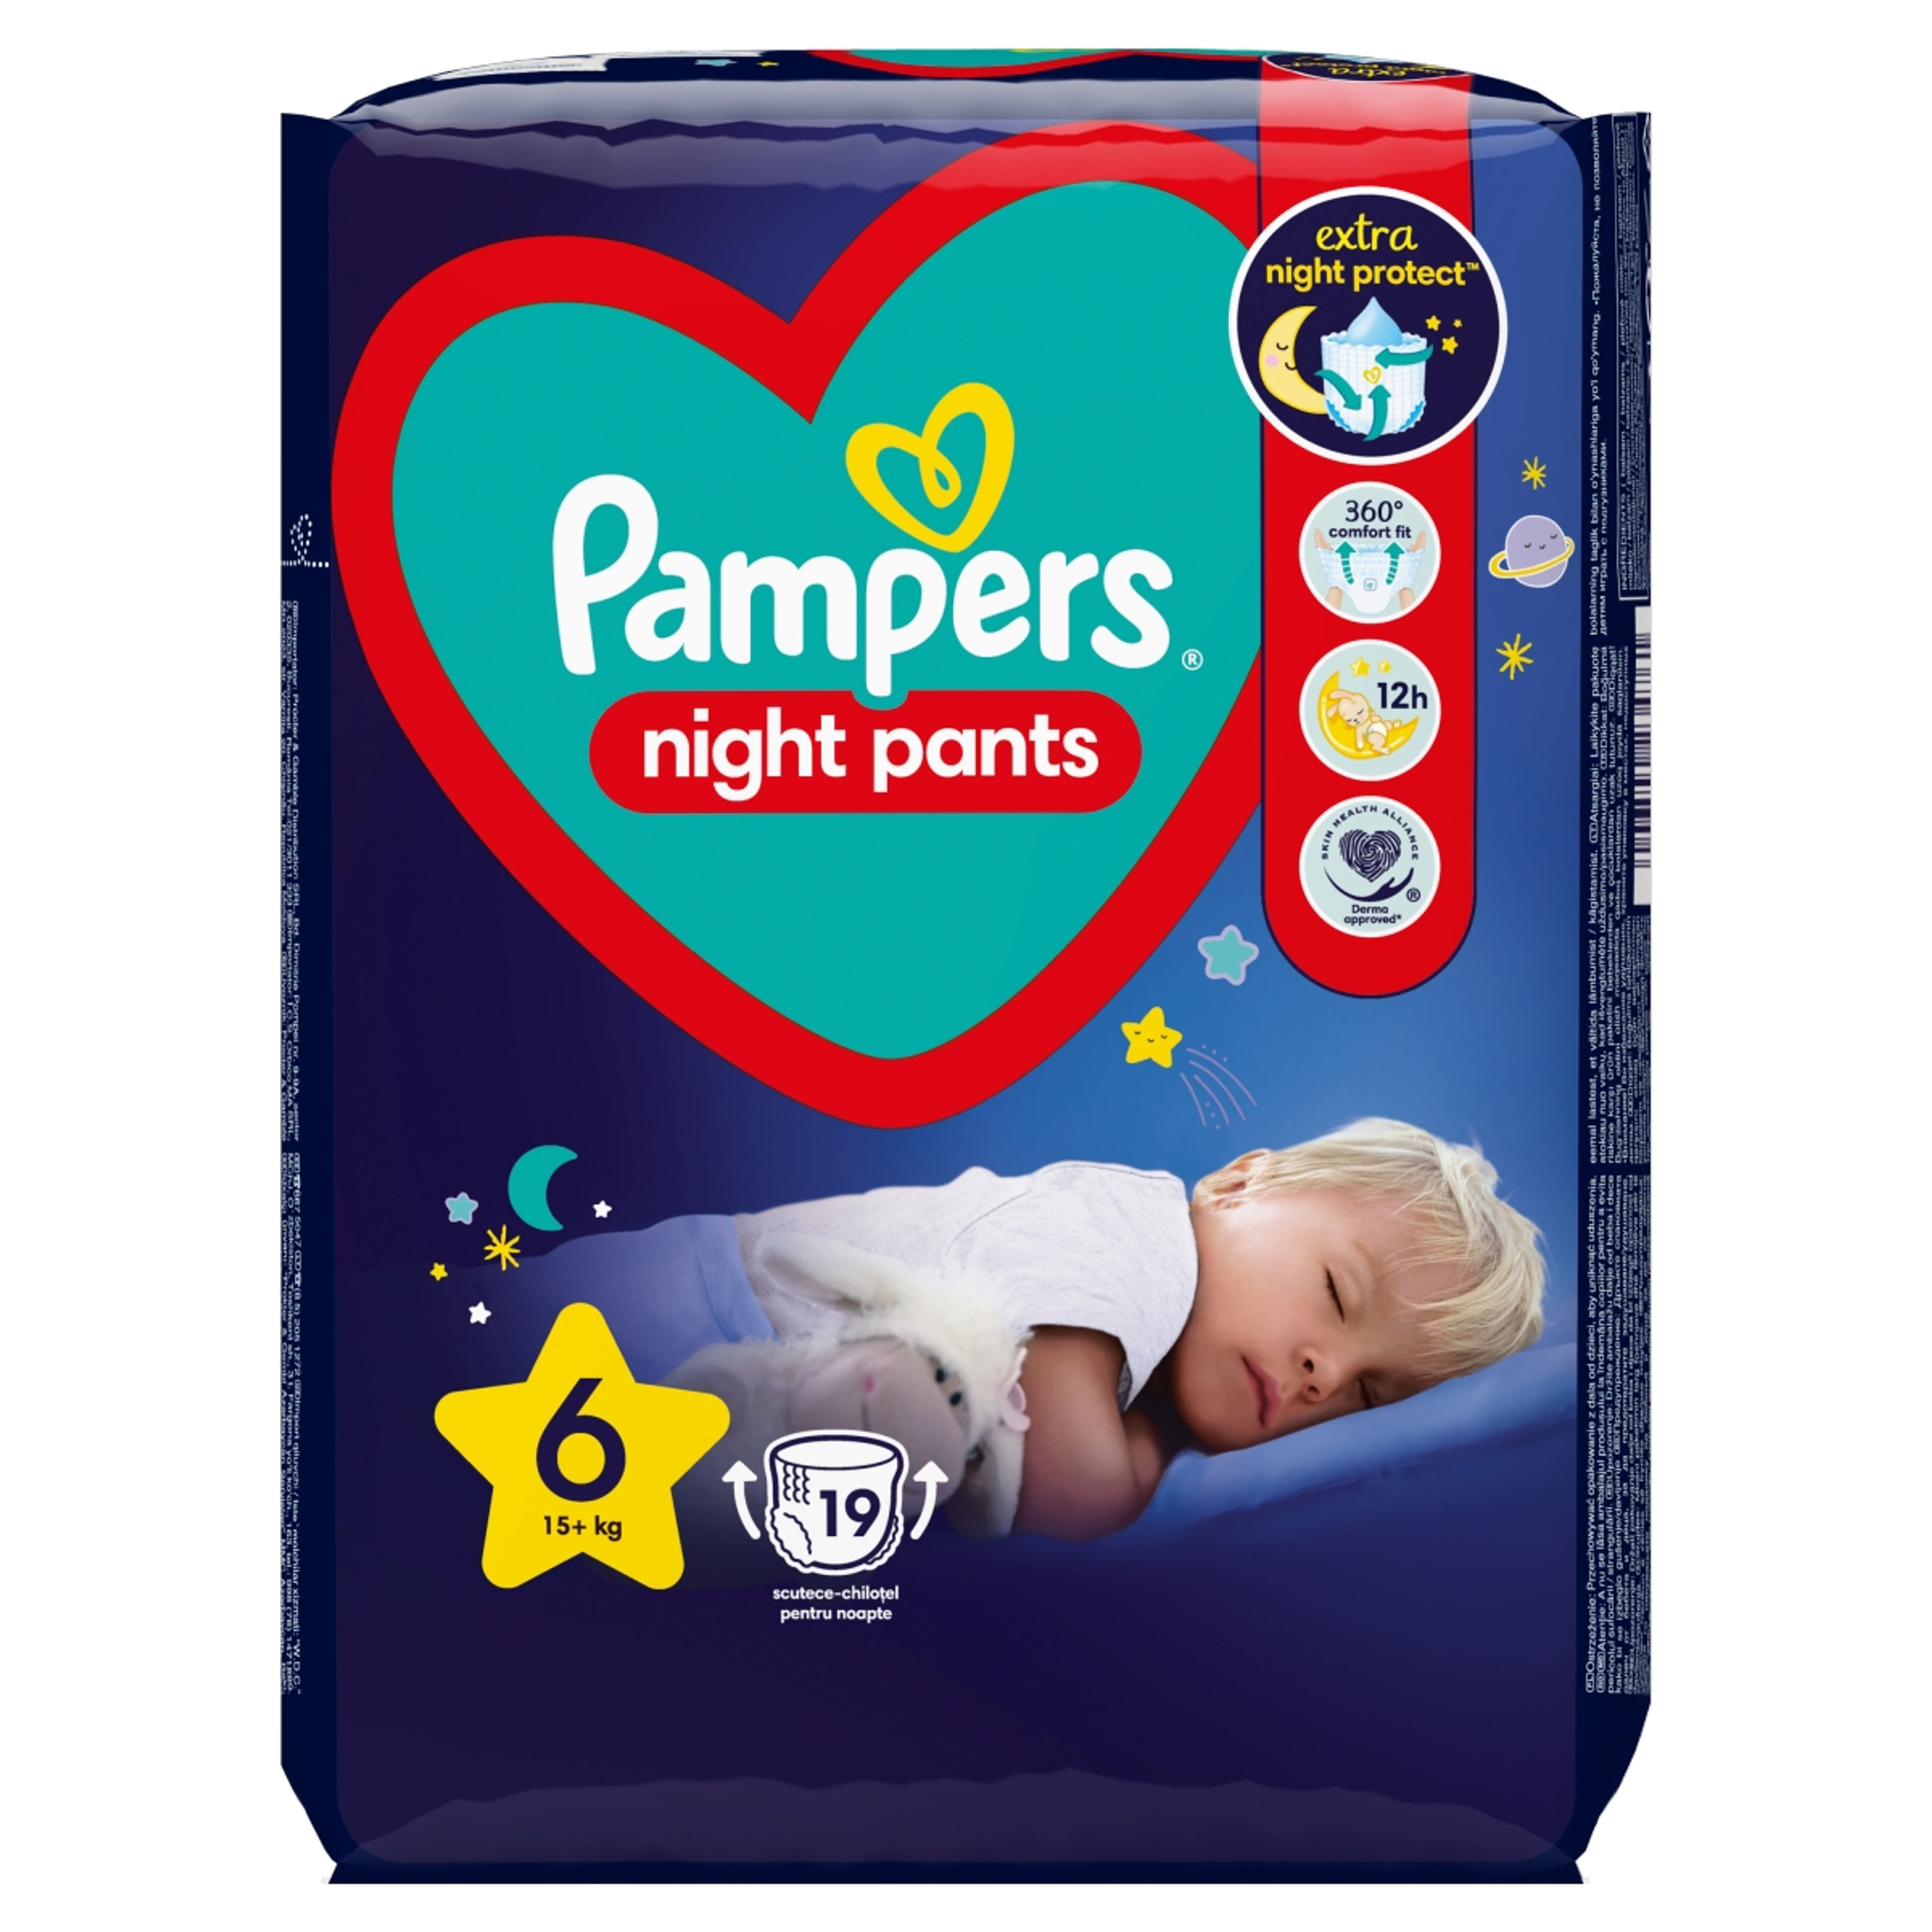 Pampers Night Pants 6-os 15+ kg - 19 db